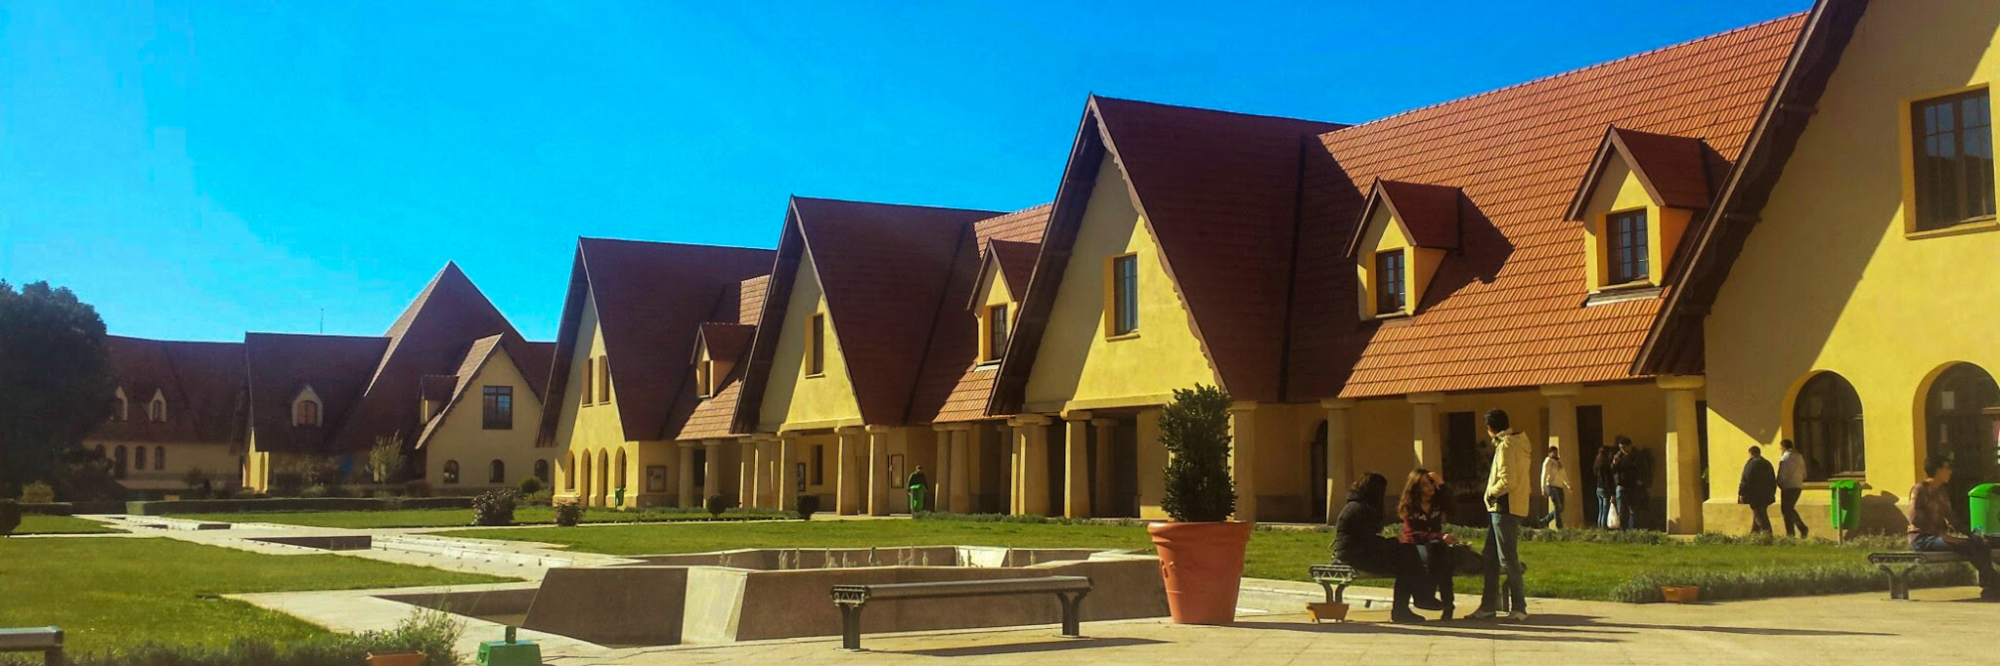 Campus buildings in Ifrane, Morocco